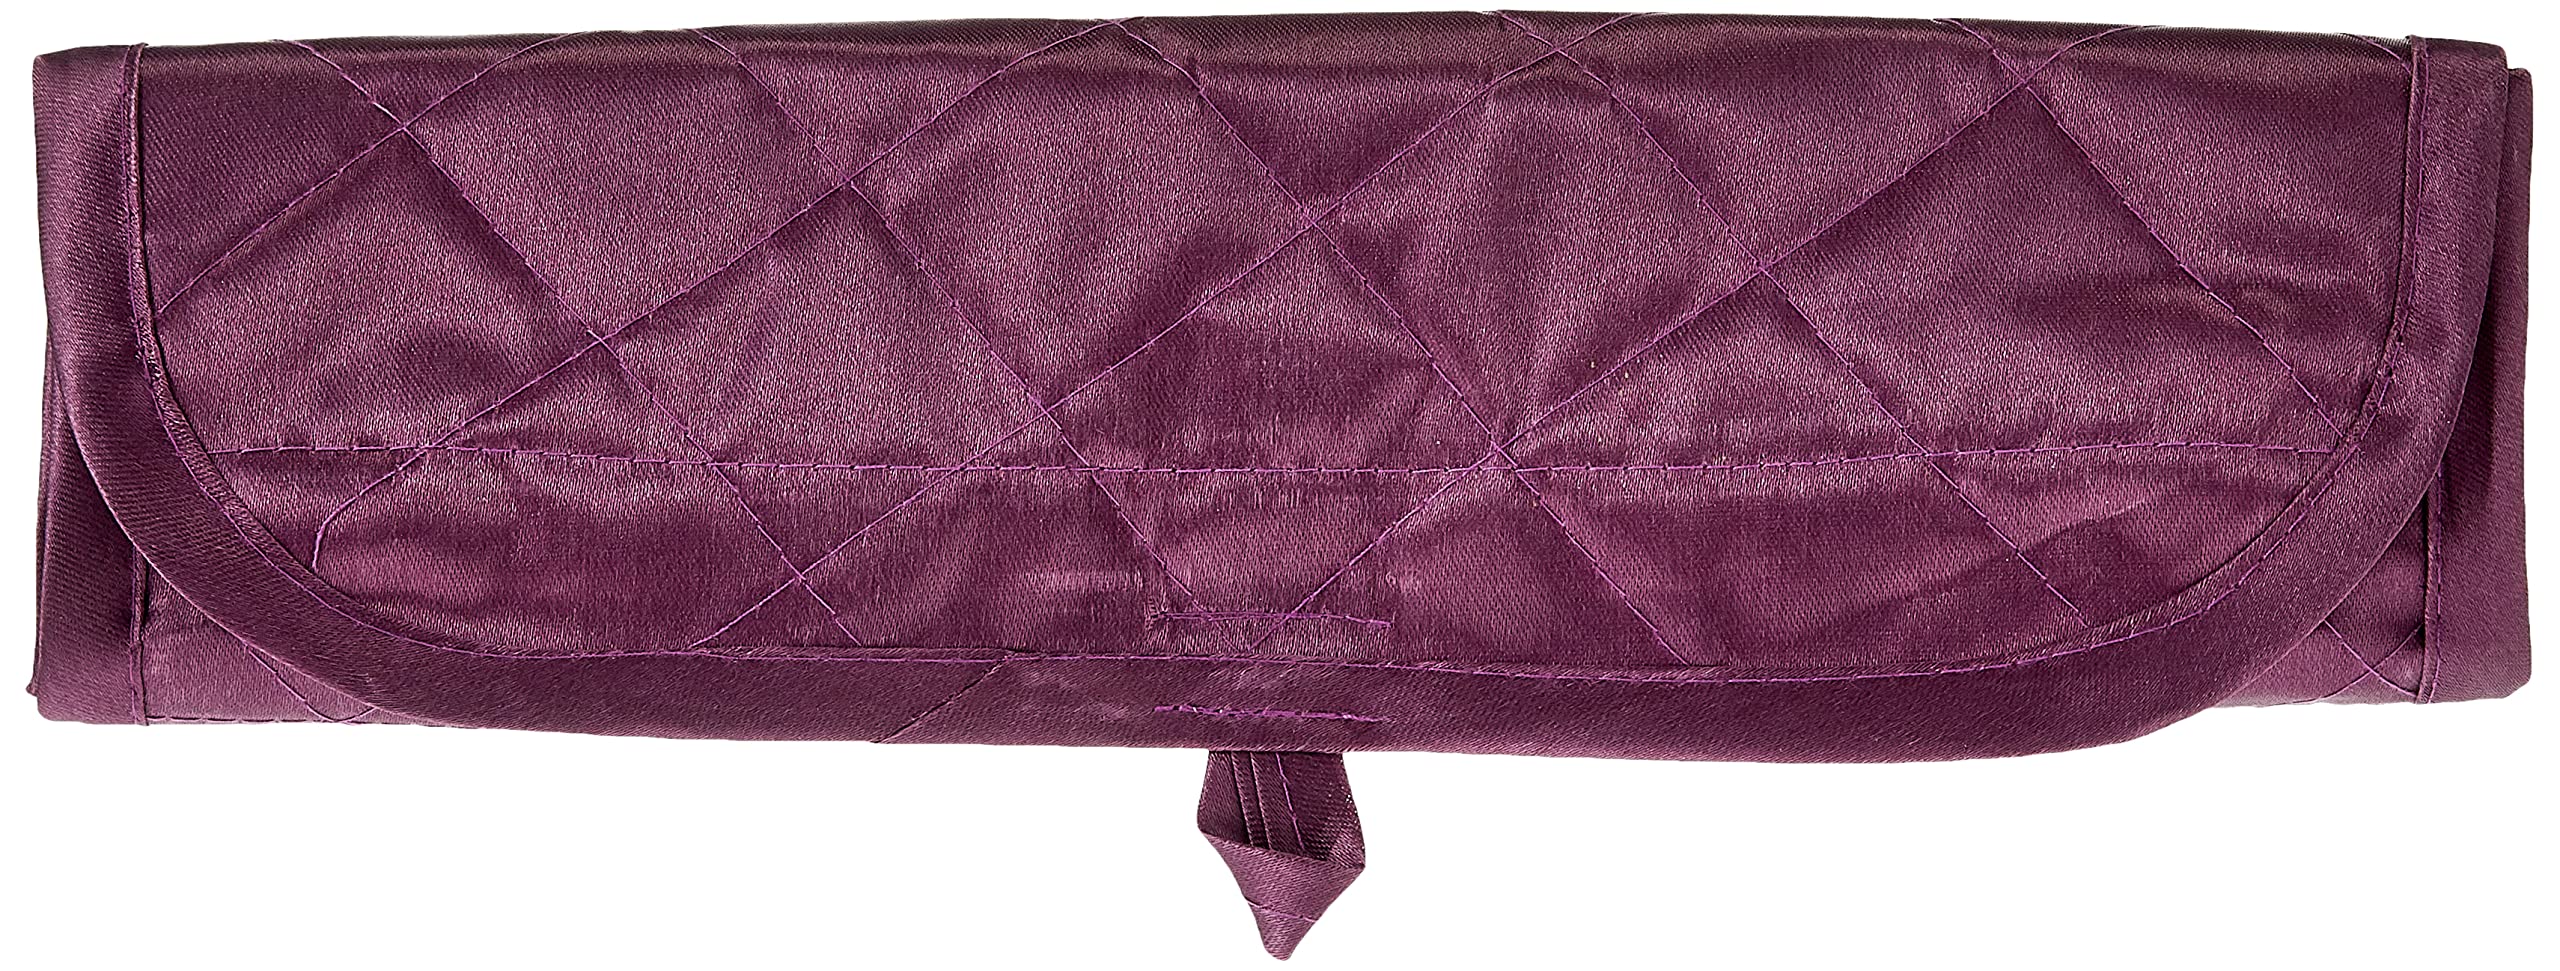 Kuber Industries™ Foldable Payal kit Travel Toilerty Bag |Travelling Organiser|Quilted Satin Material (Purple)